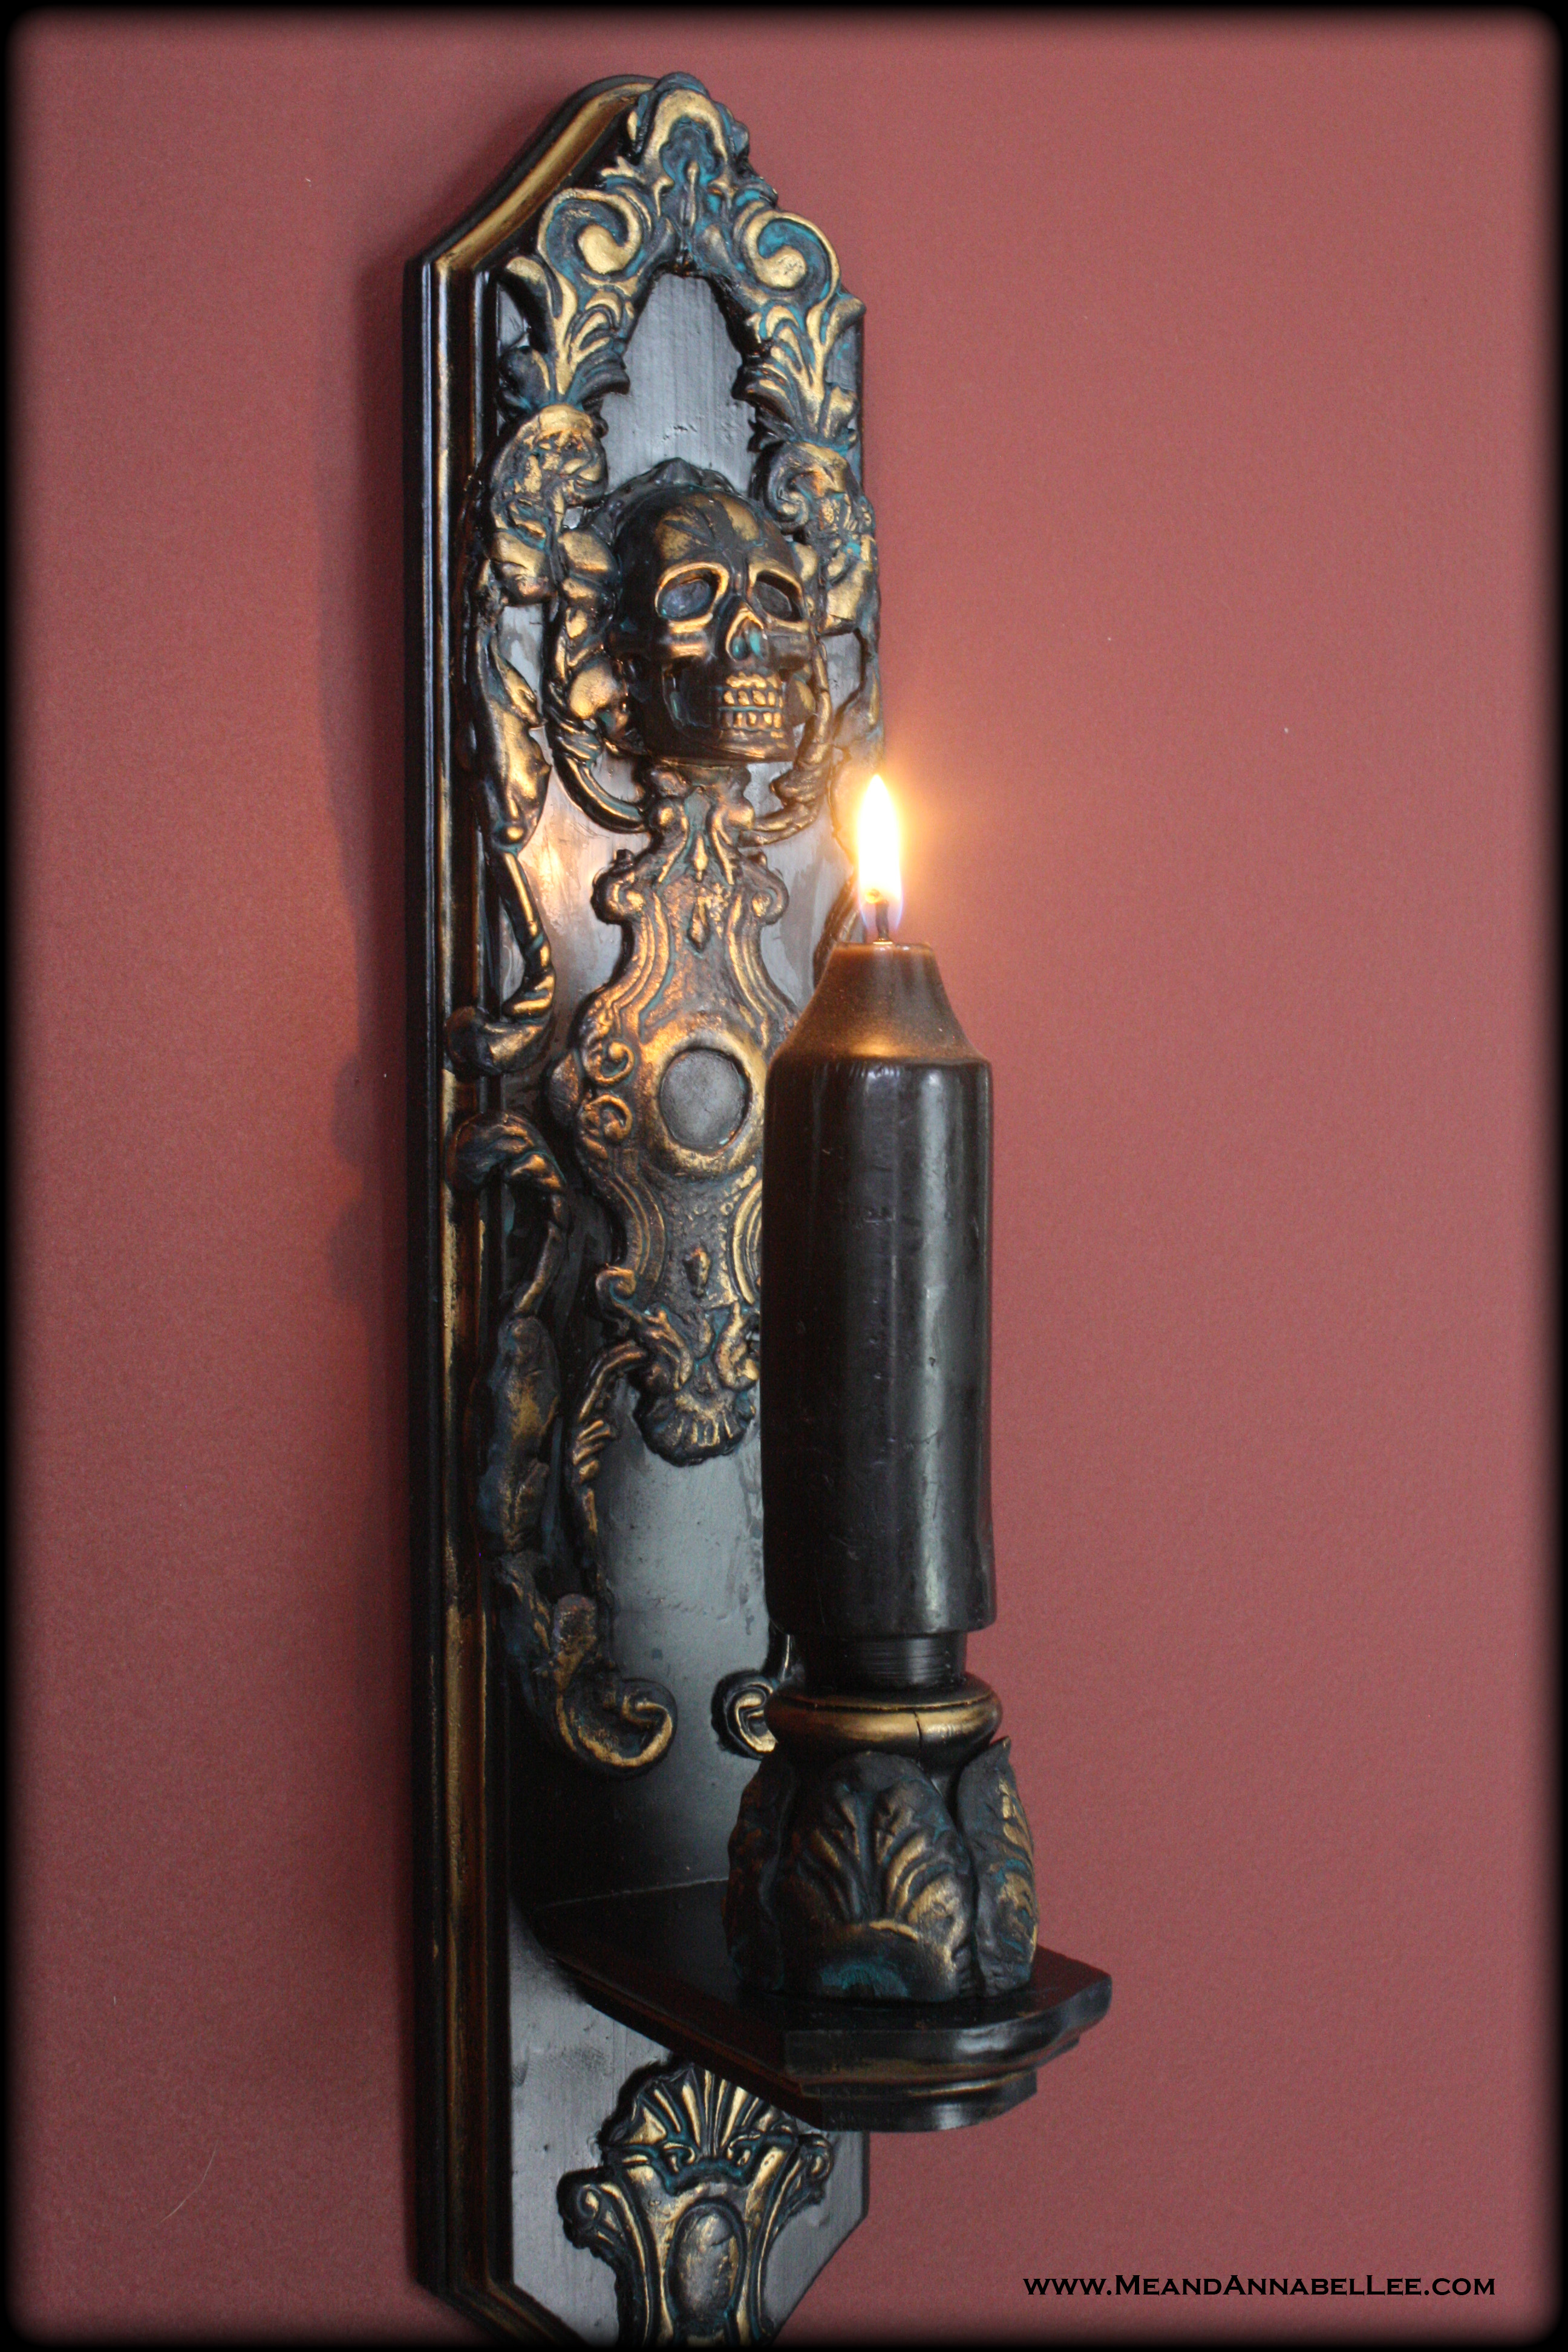 DIY Gothic Home Decor | Skull Candle Sconce | Paper Clay Casting | Faux Antique Painting Techniques | www.MeandAnnabelLee.com